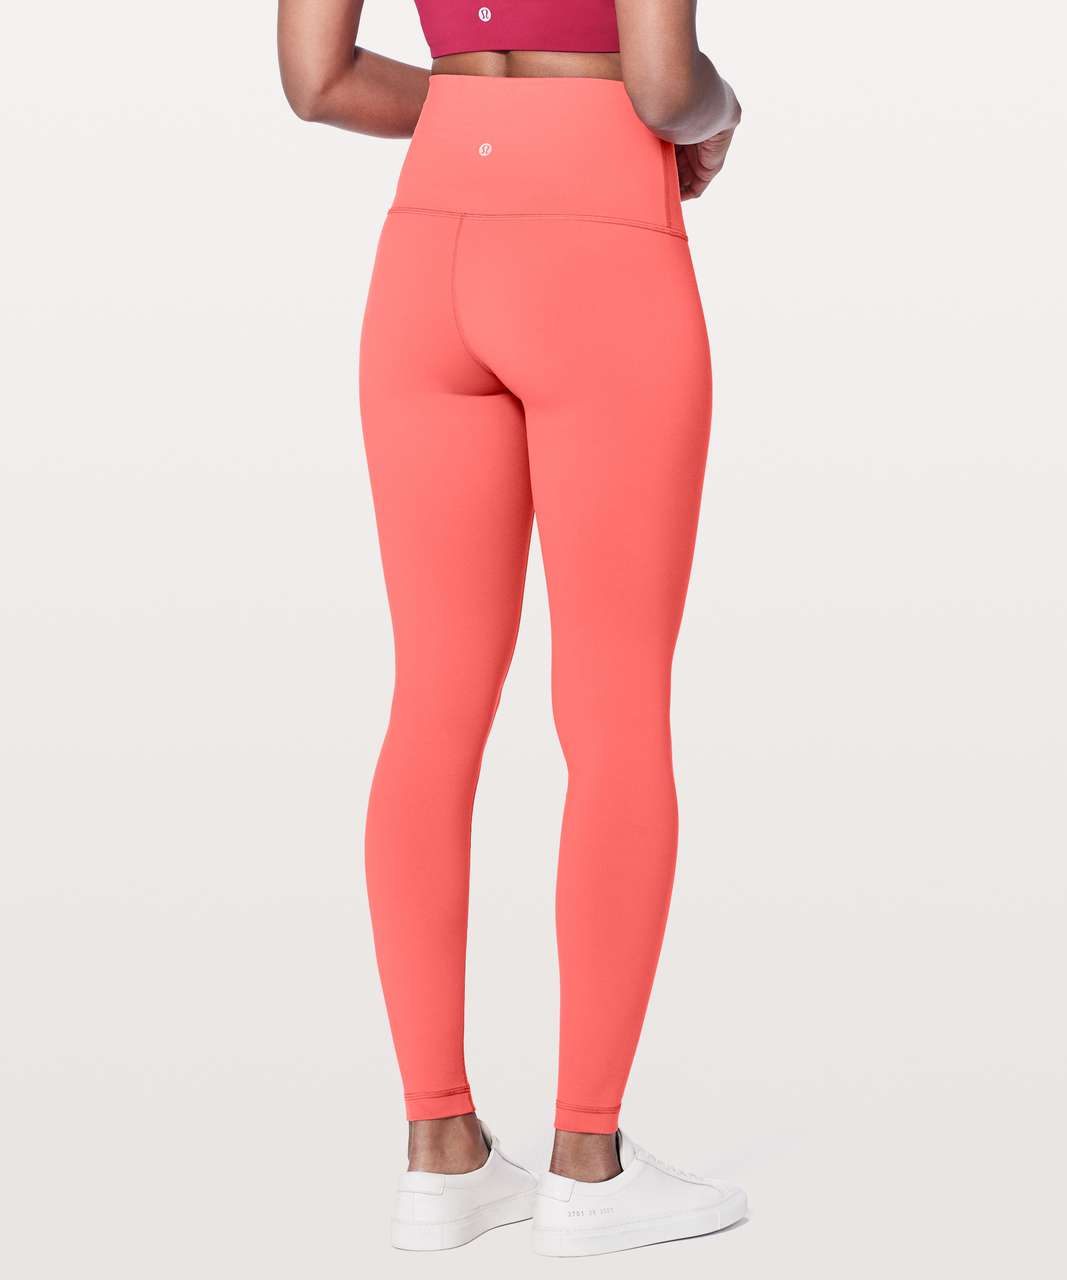 Lululemon Wunder Under Super High-Rise Tight *Full-On Luon 28" - Dust Coral